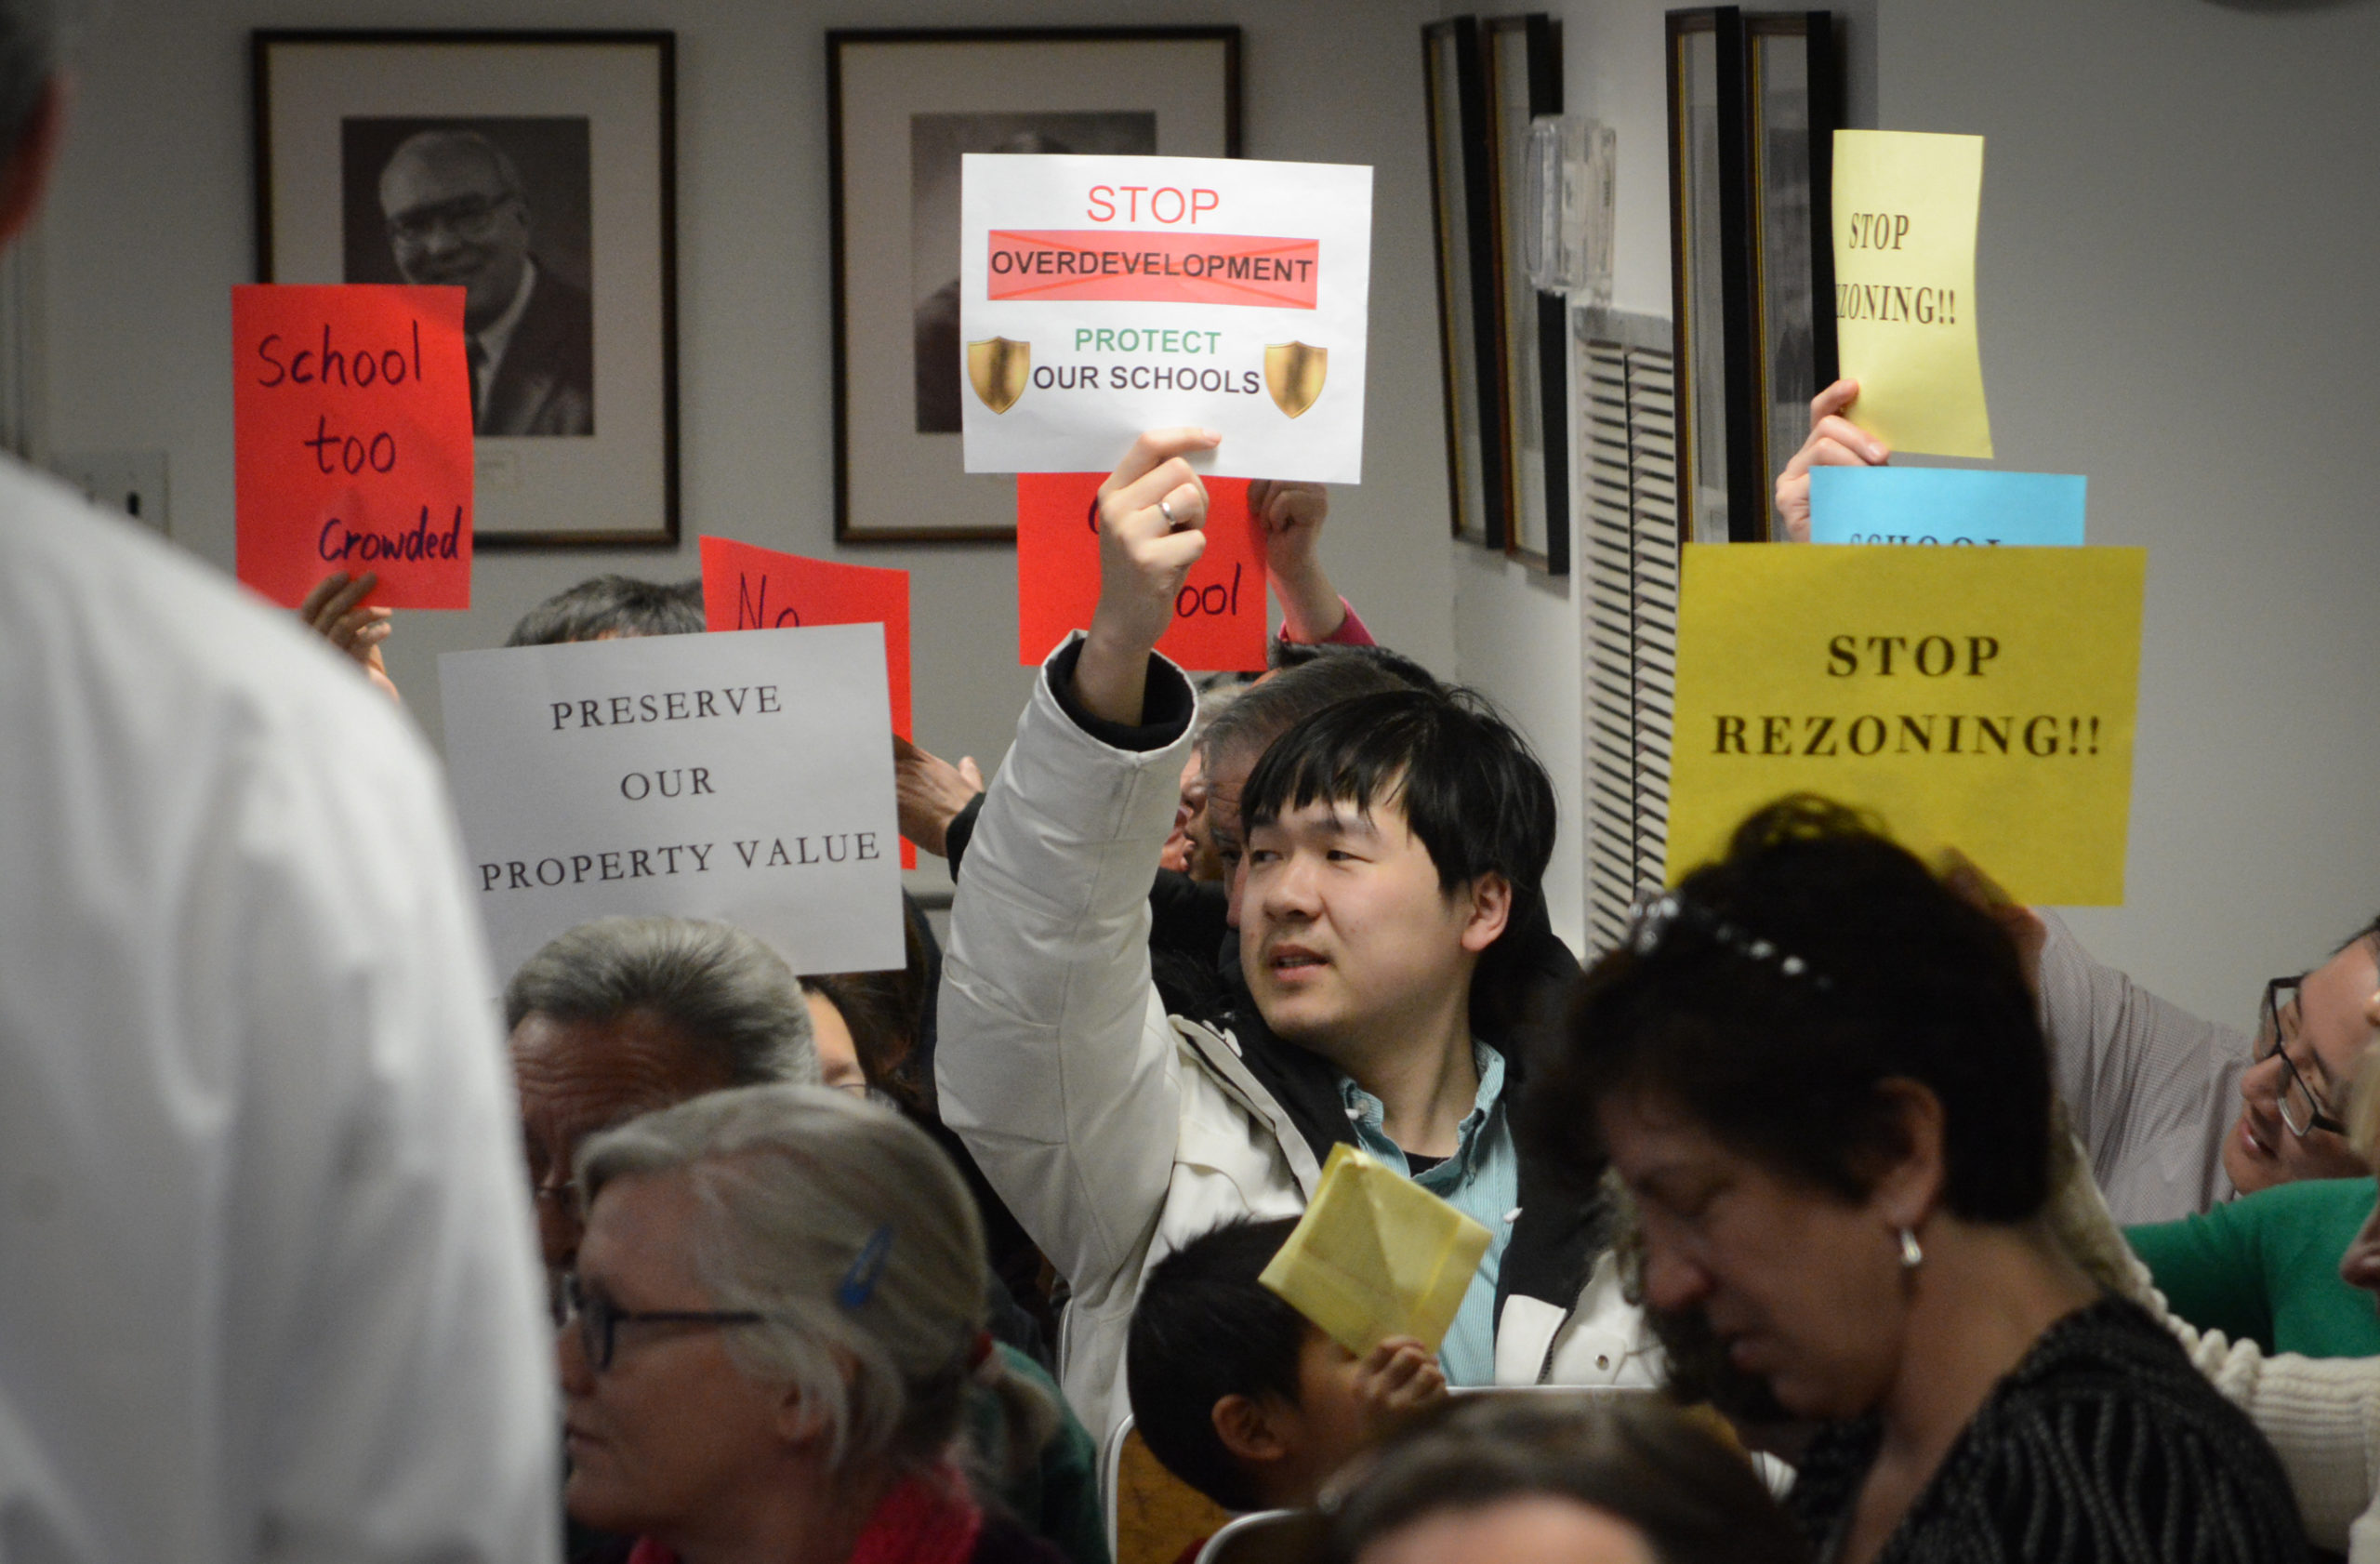 Residents raised alarms about the possible impact of VHB's proposed zoning changes could have on schools and the community. (Photo by Janelle Clausen)